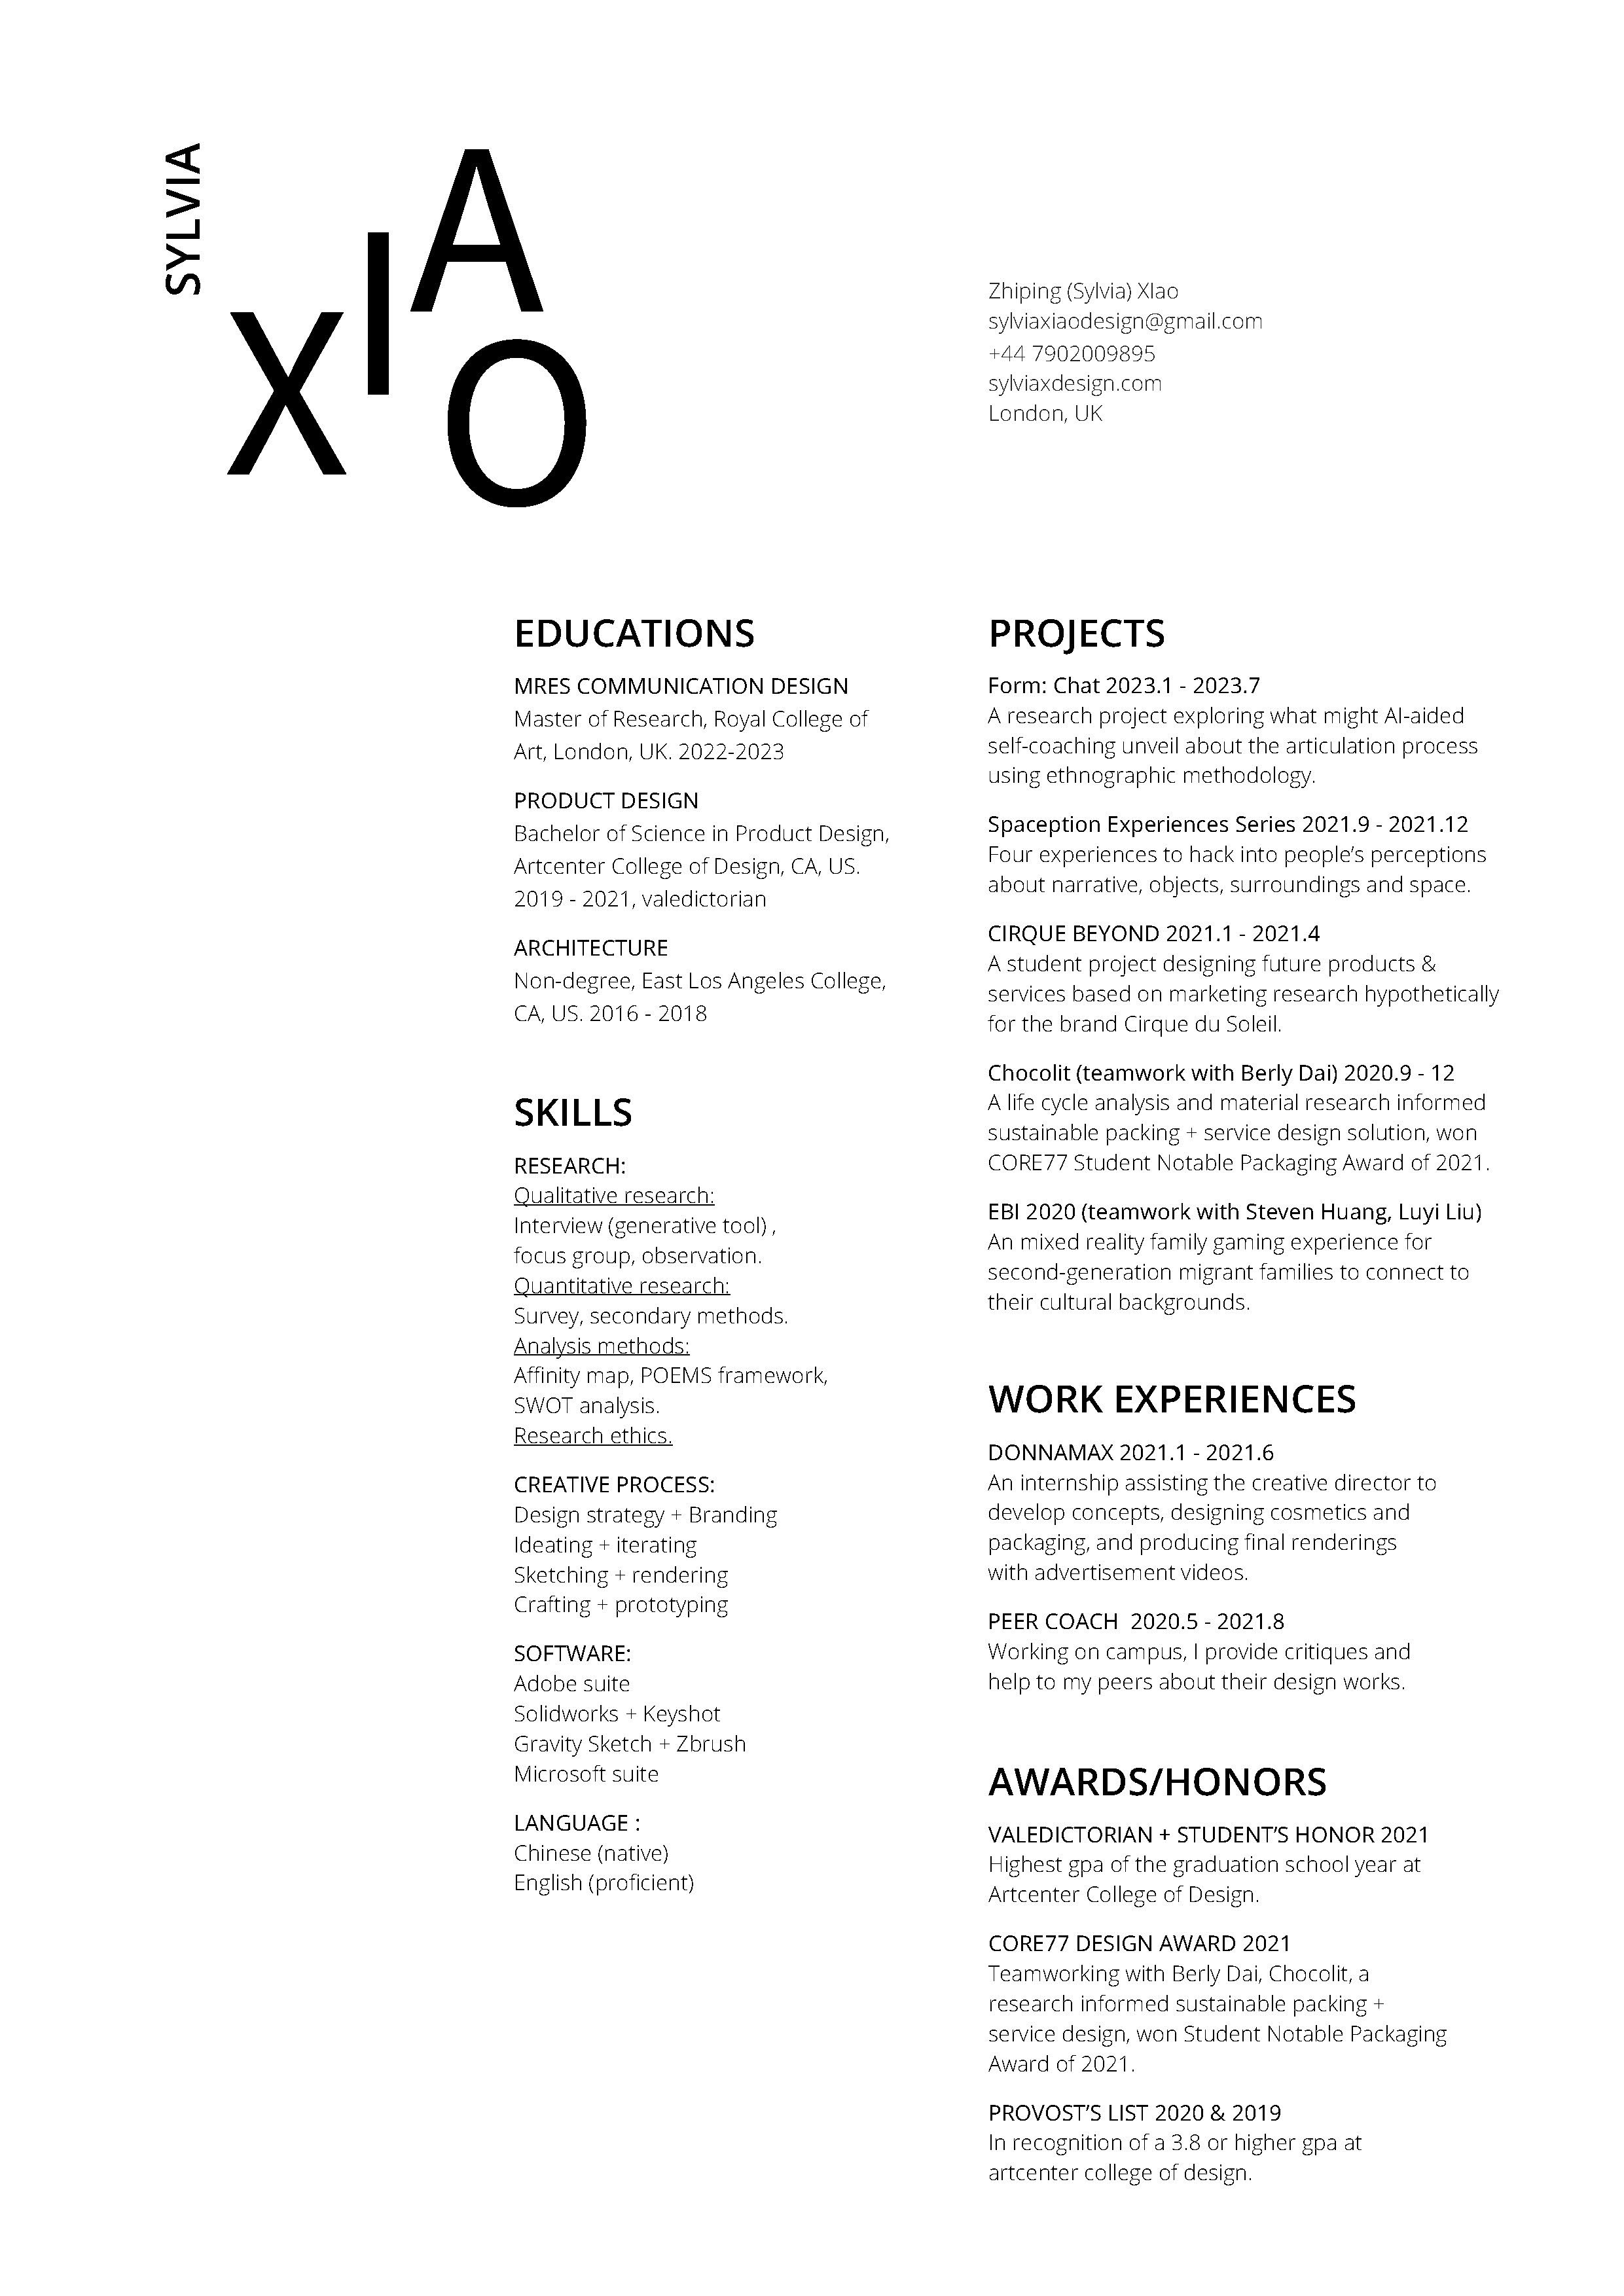 Zhiping (Sylvia) Xiao_resume for research jpg.jpg